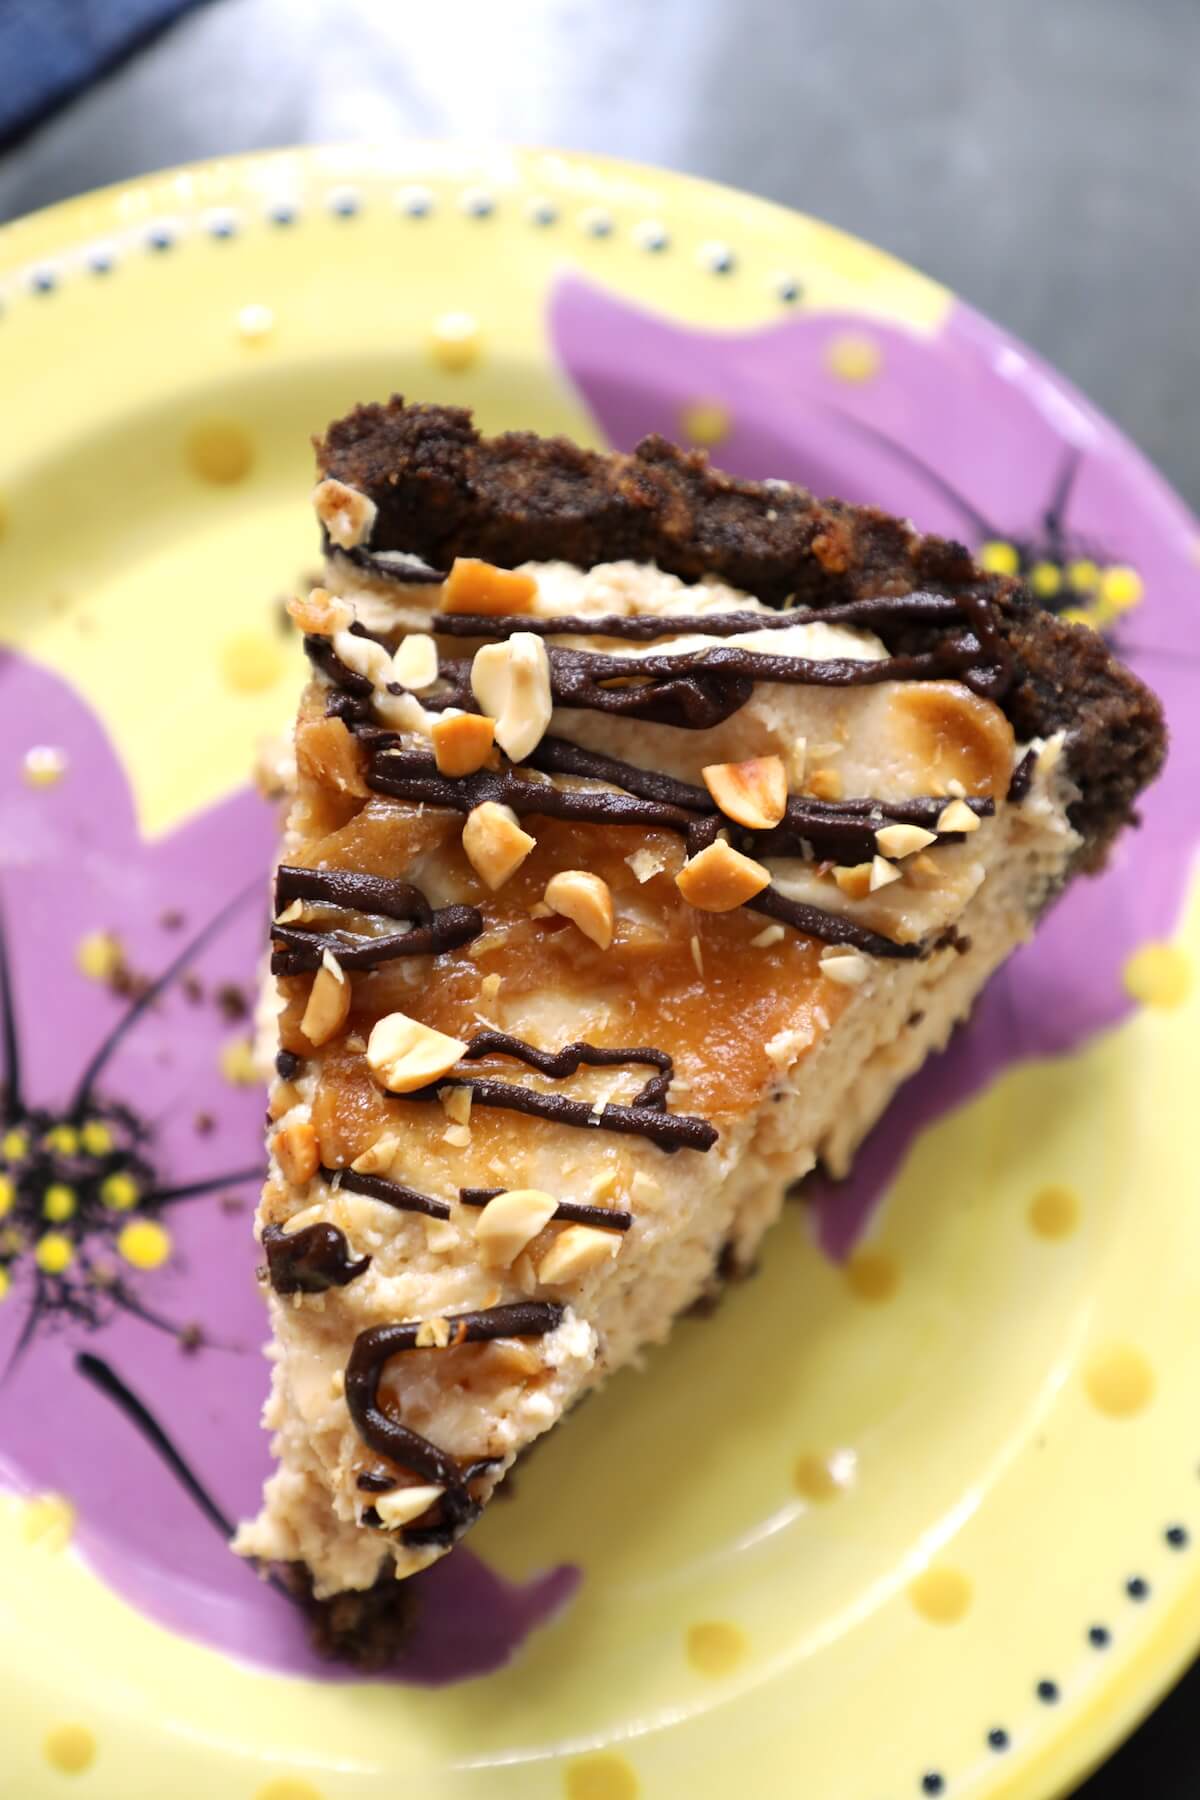 Top view of a slice of Keto Peanut Butter & Chocolate Pie on a yellow pottery plate with purple flowers on it. 